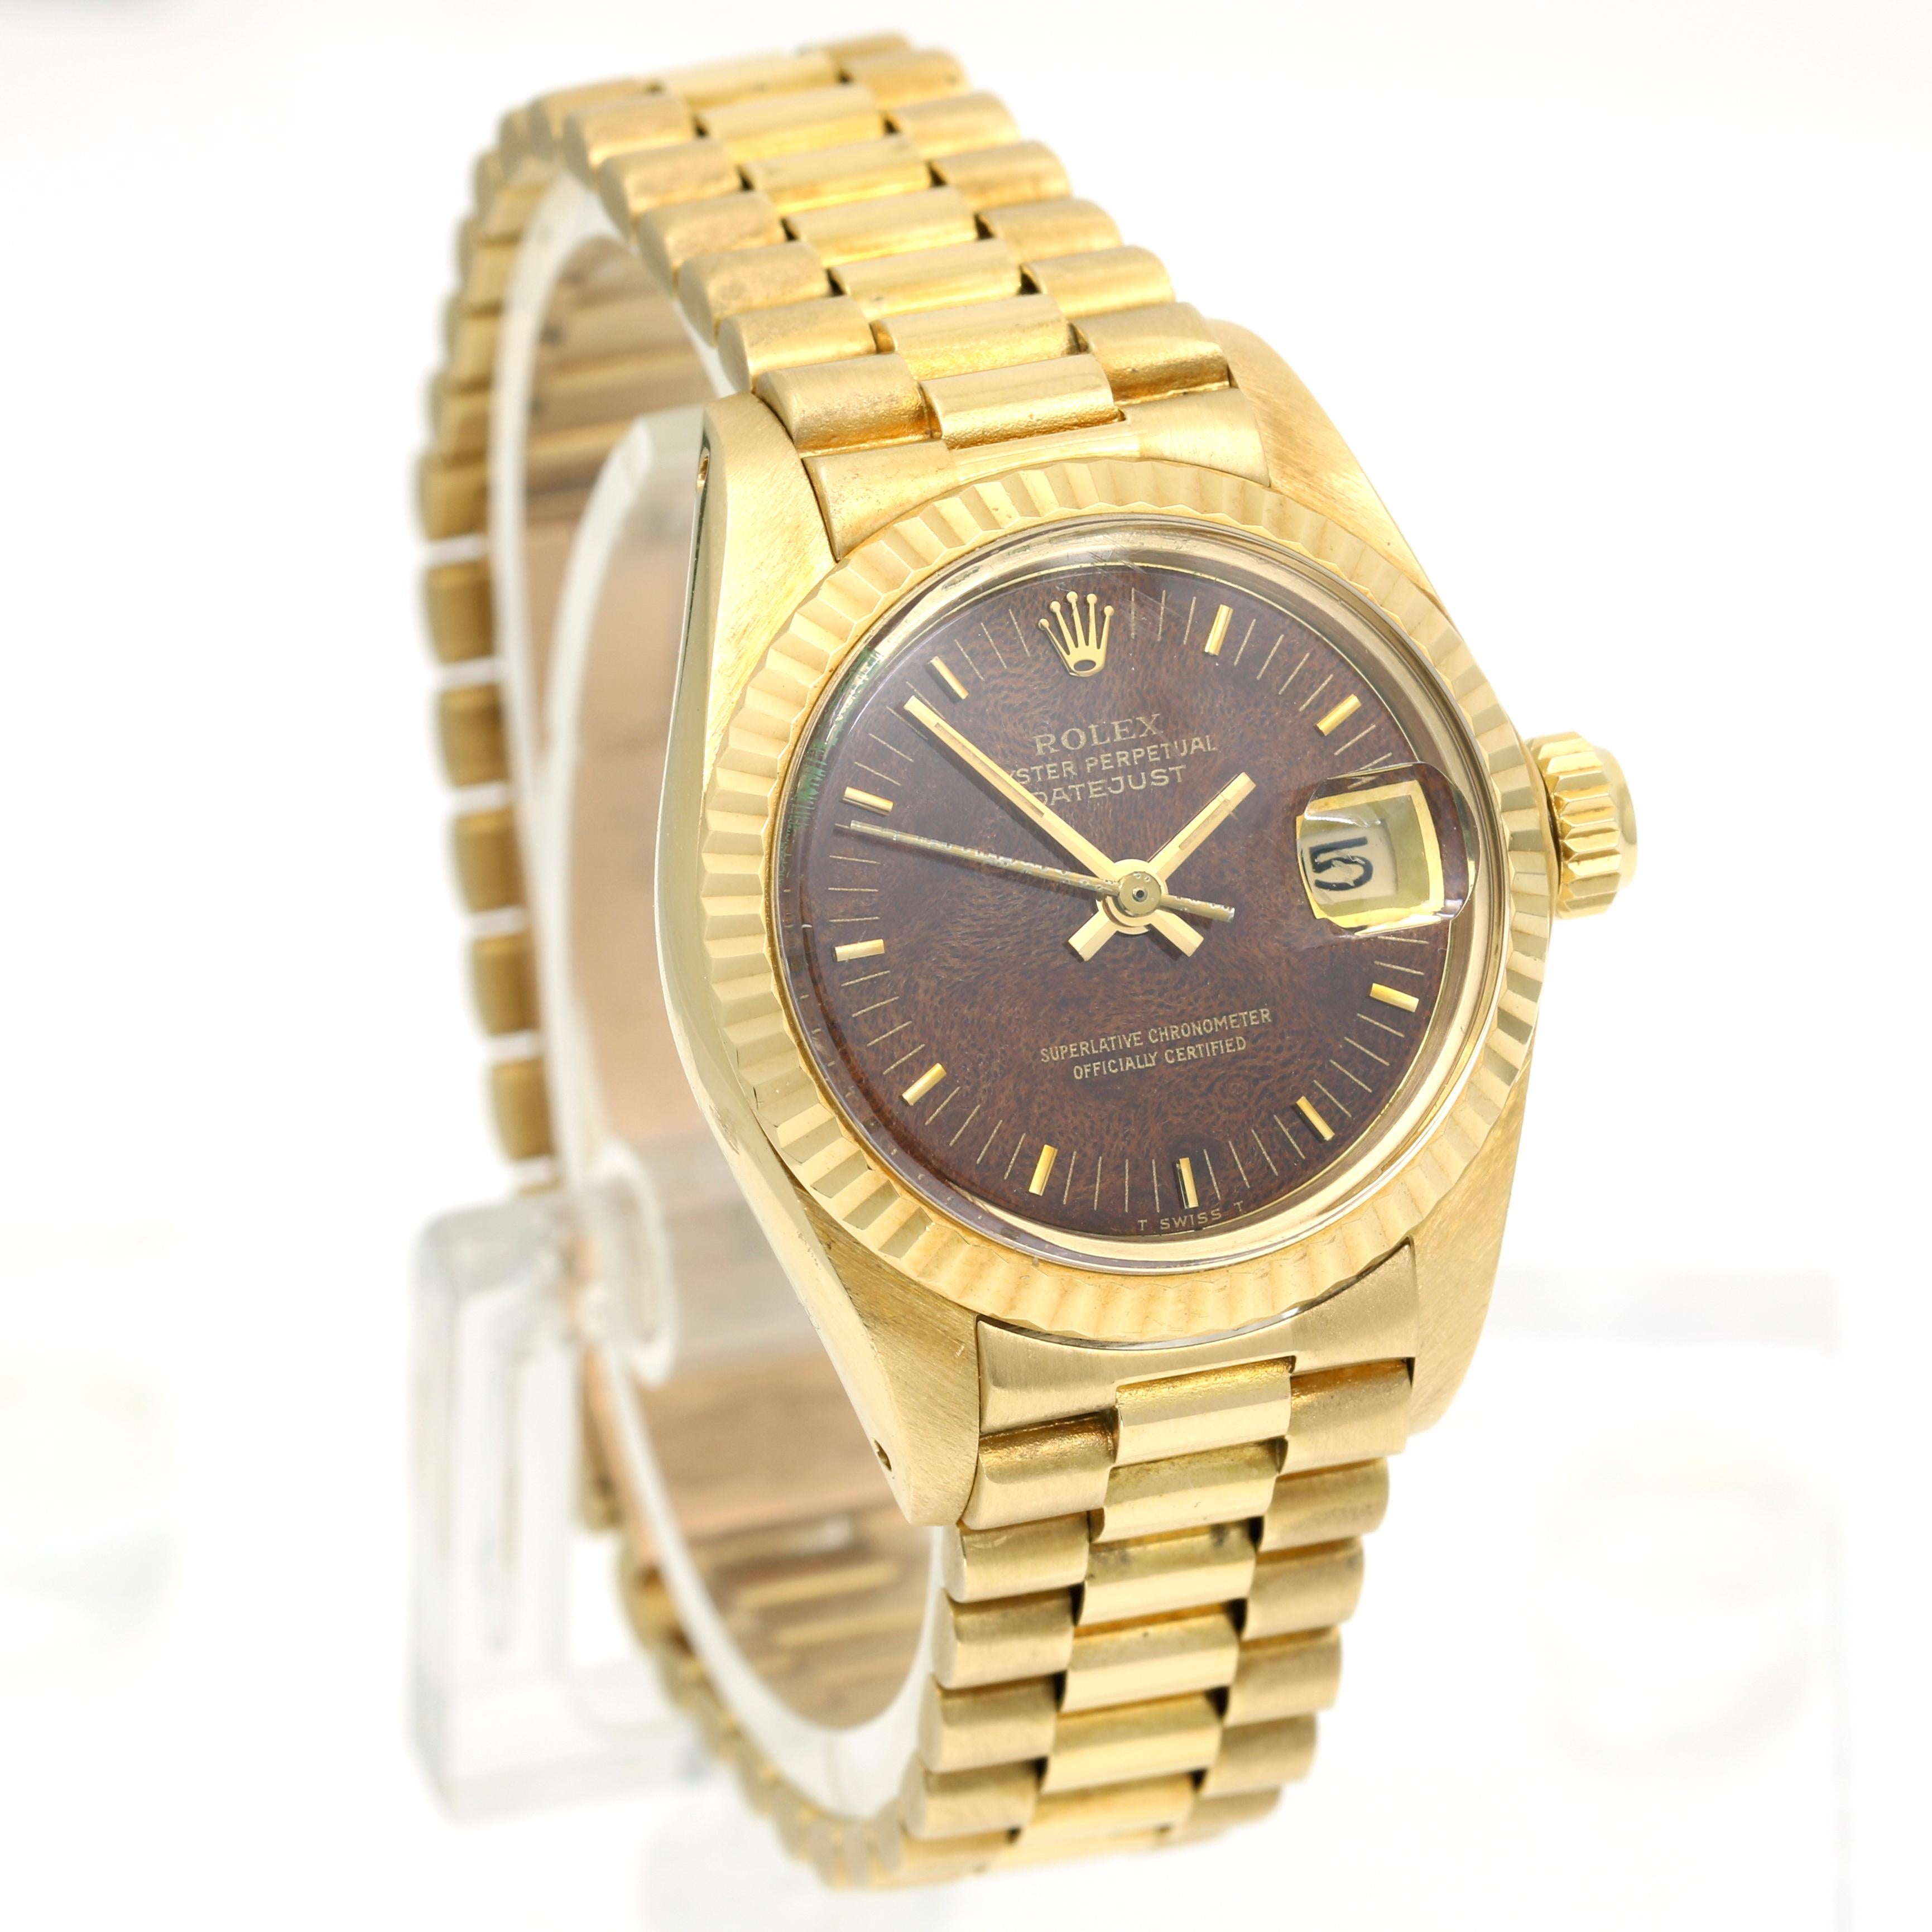 Immerse yourself in luxury with the exquisite Rolex President Lady Datejust 6917. Crafted from lustrous 18k yellow gold, this 26mm timepiece boasts a rare mahogany wood brown dial that exudes elegance and rarity. In excellent condition and having